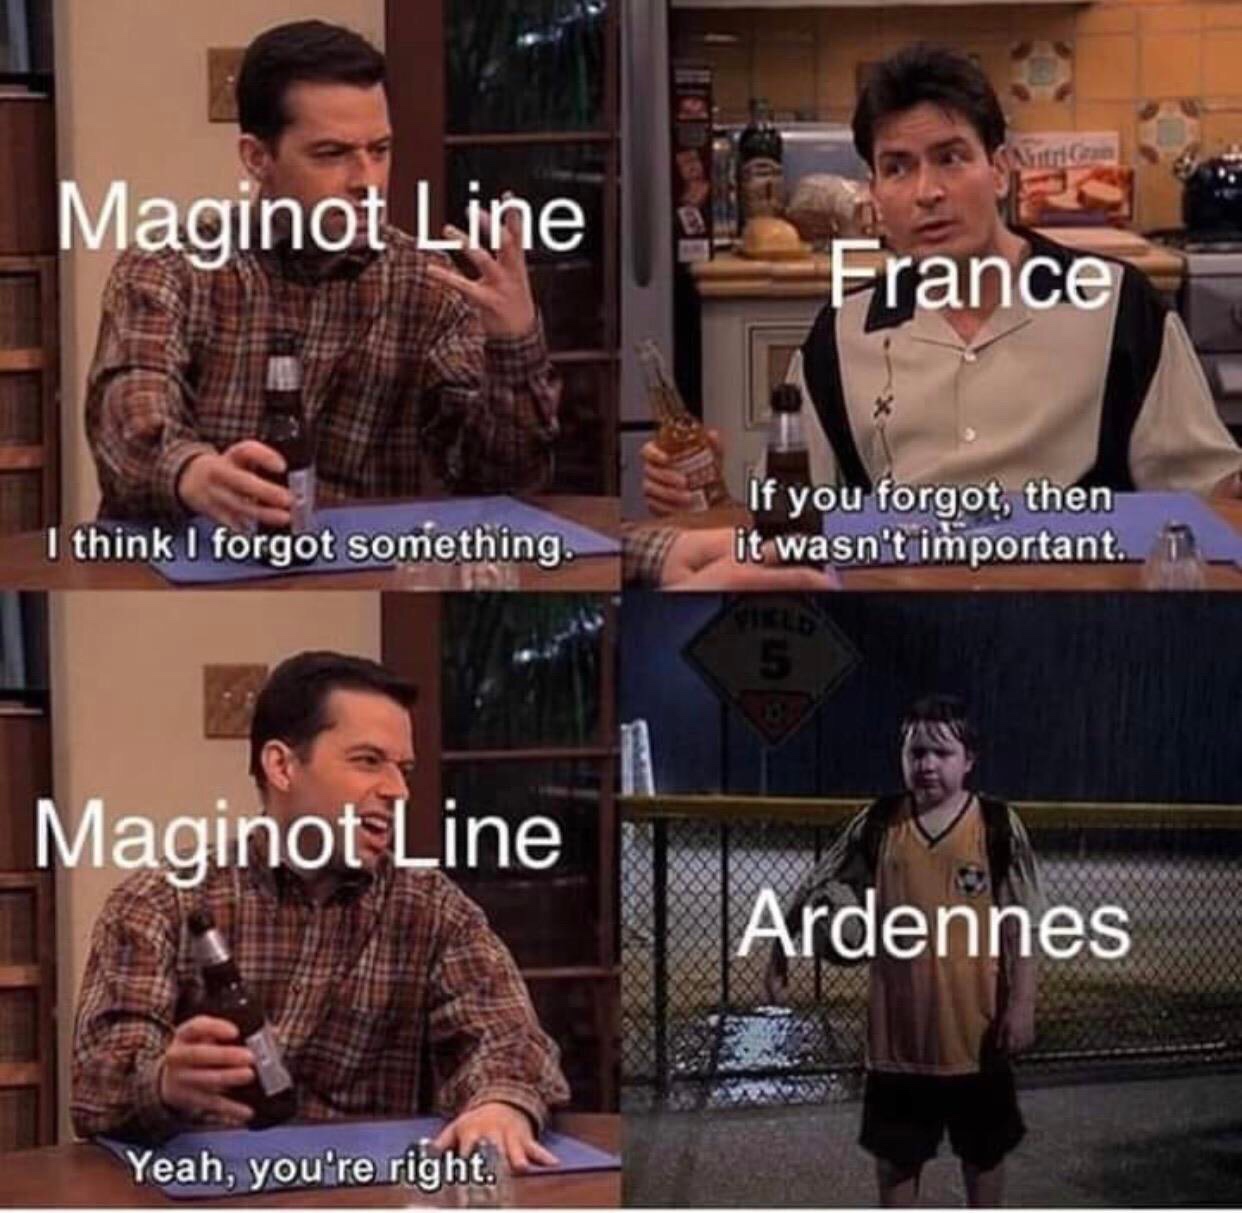 think i forgot something meme - Maginot Line Erance If you forgot, then it wasn't important. I think I forgot something. Maginot Line Ardennes Yeah, you're right.